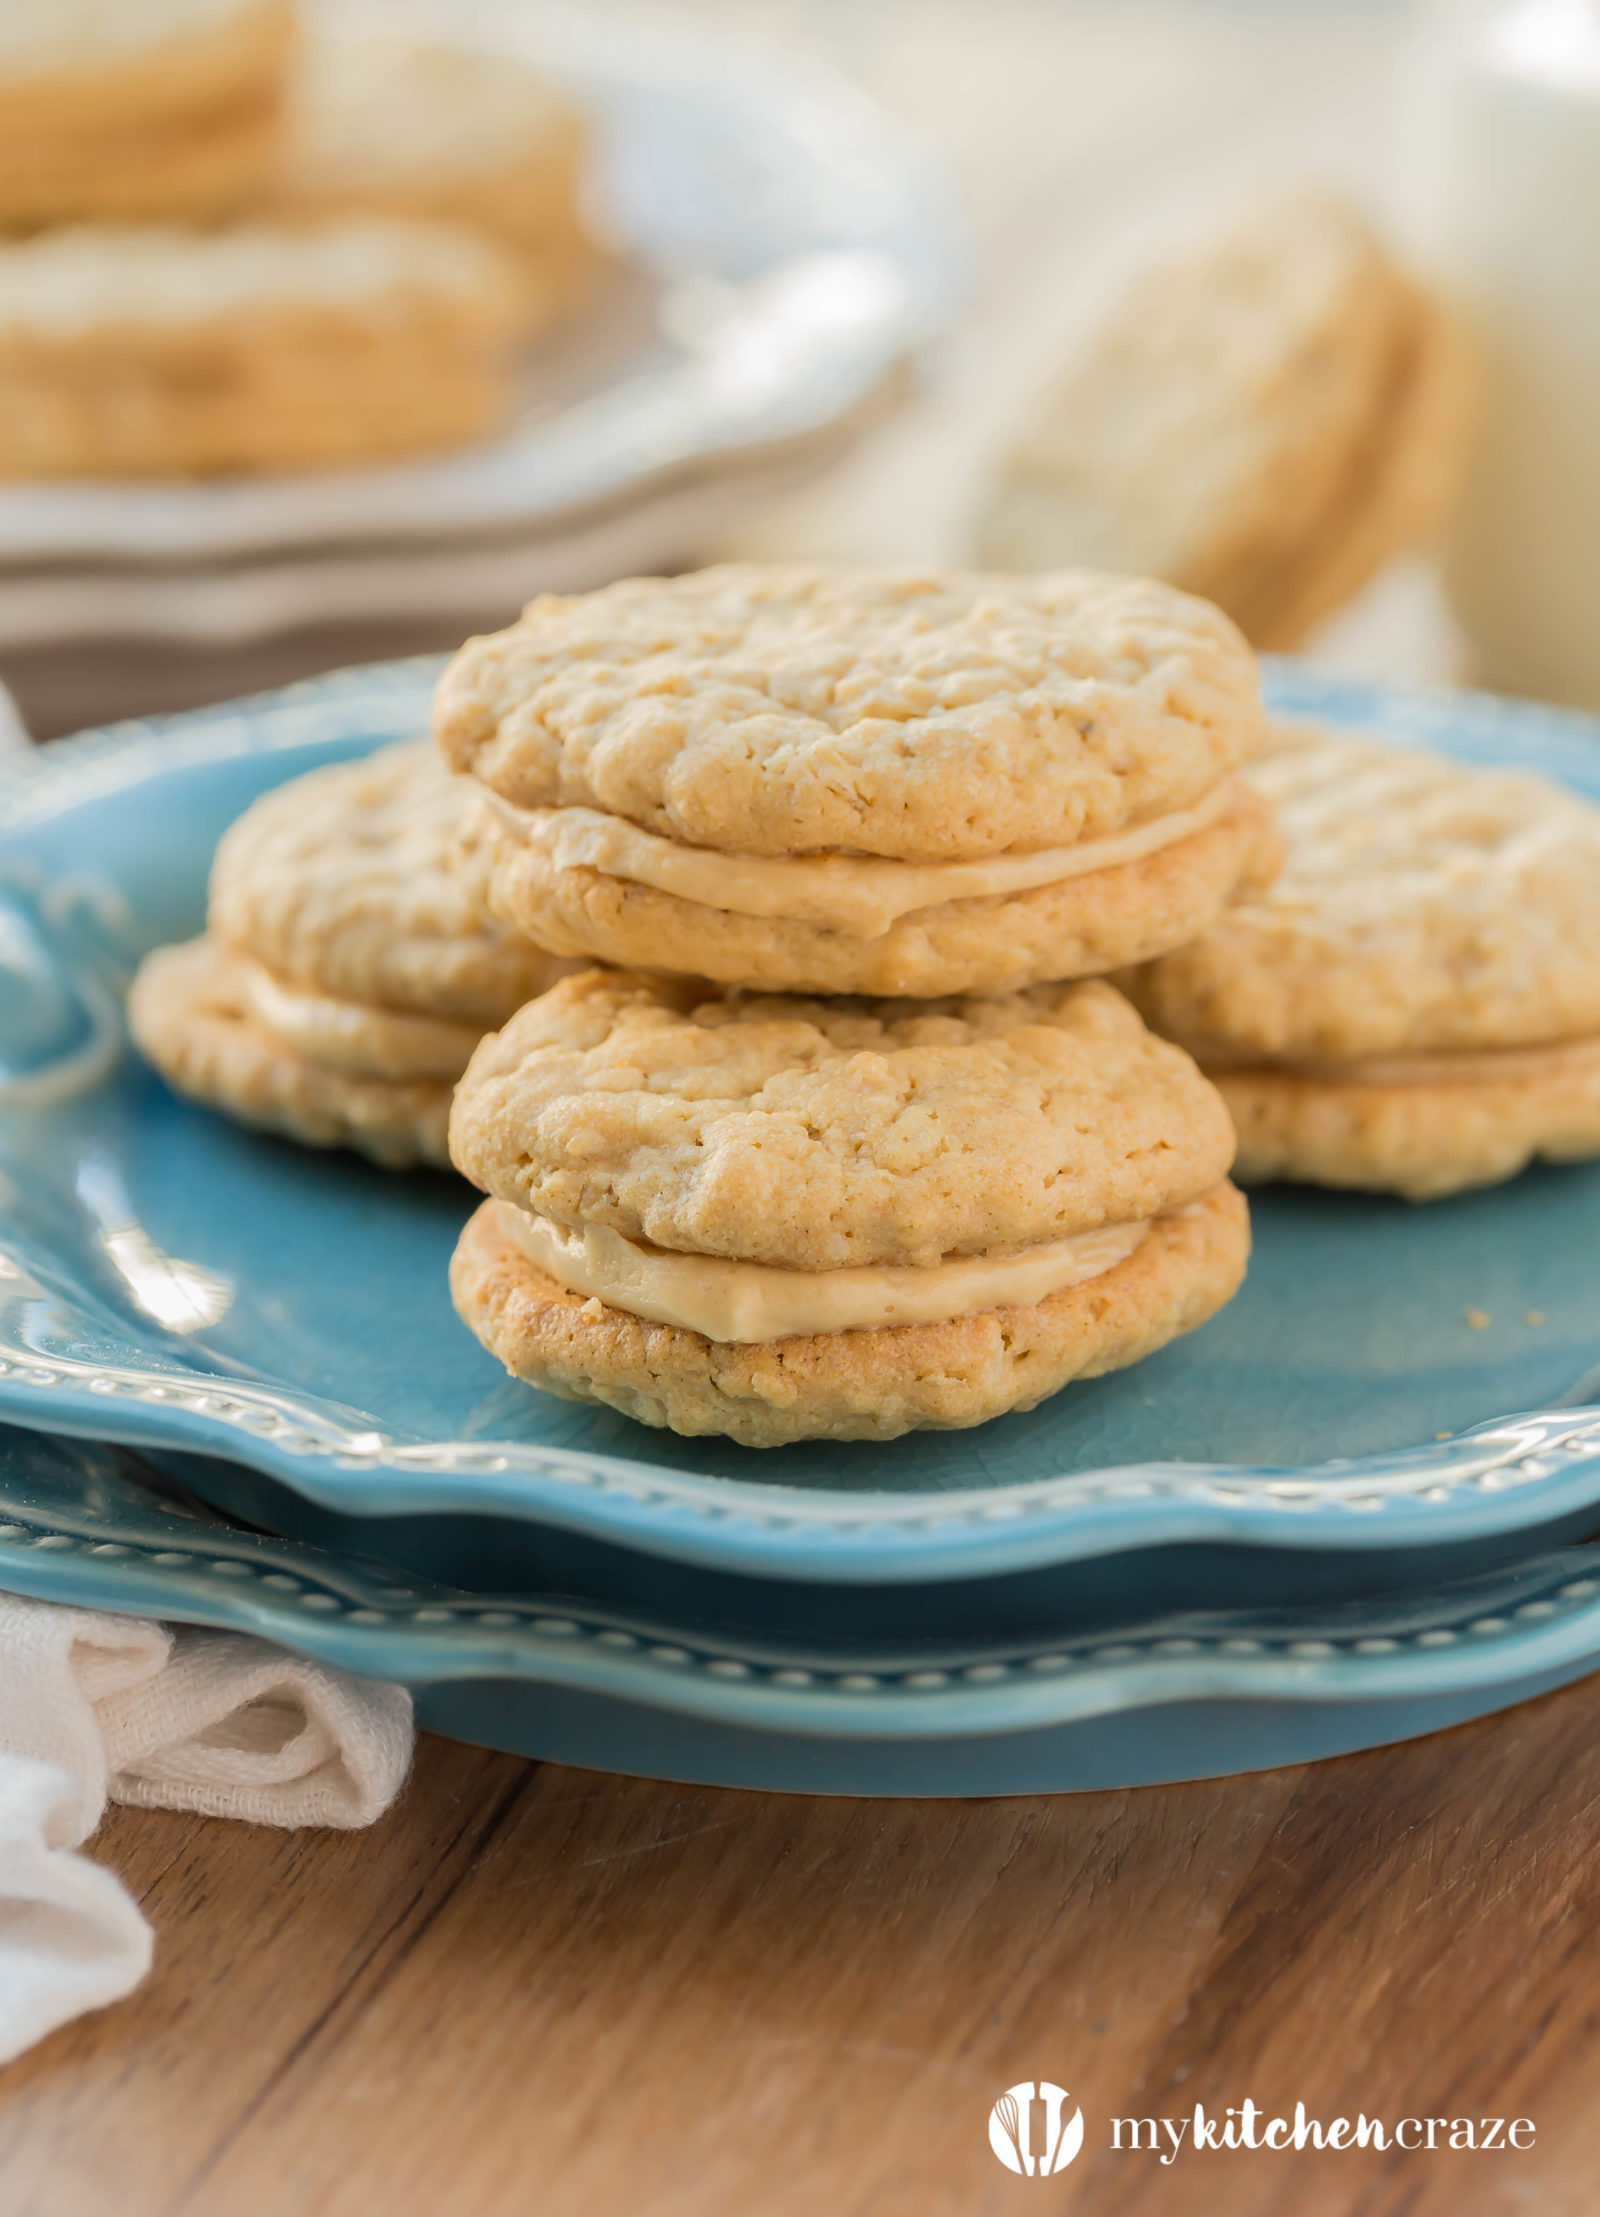 Peanut Butter Sandwich Cookies are insanely good and so addicting. These are a copy cat version of the popular Girl Scout cookie. They are easy to make, taste delicious and you don't have to wait a year to have them!